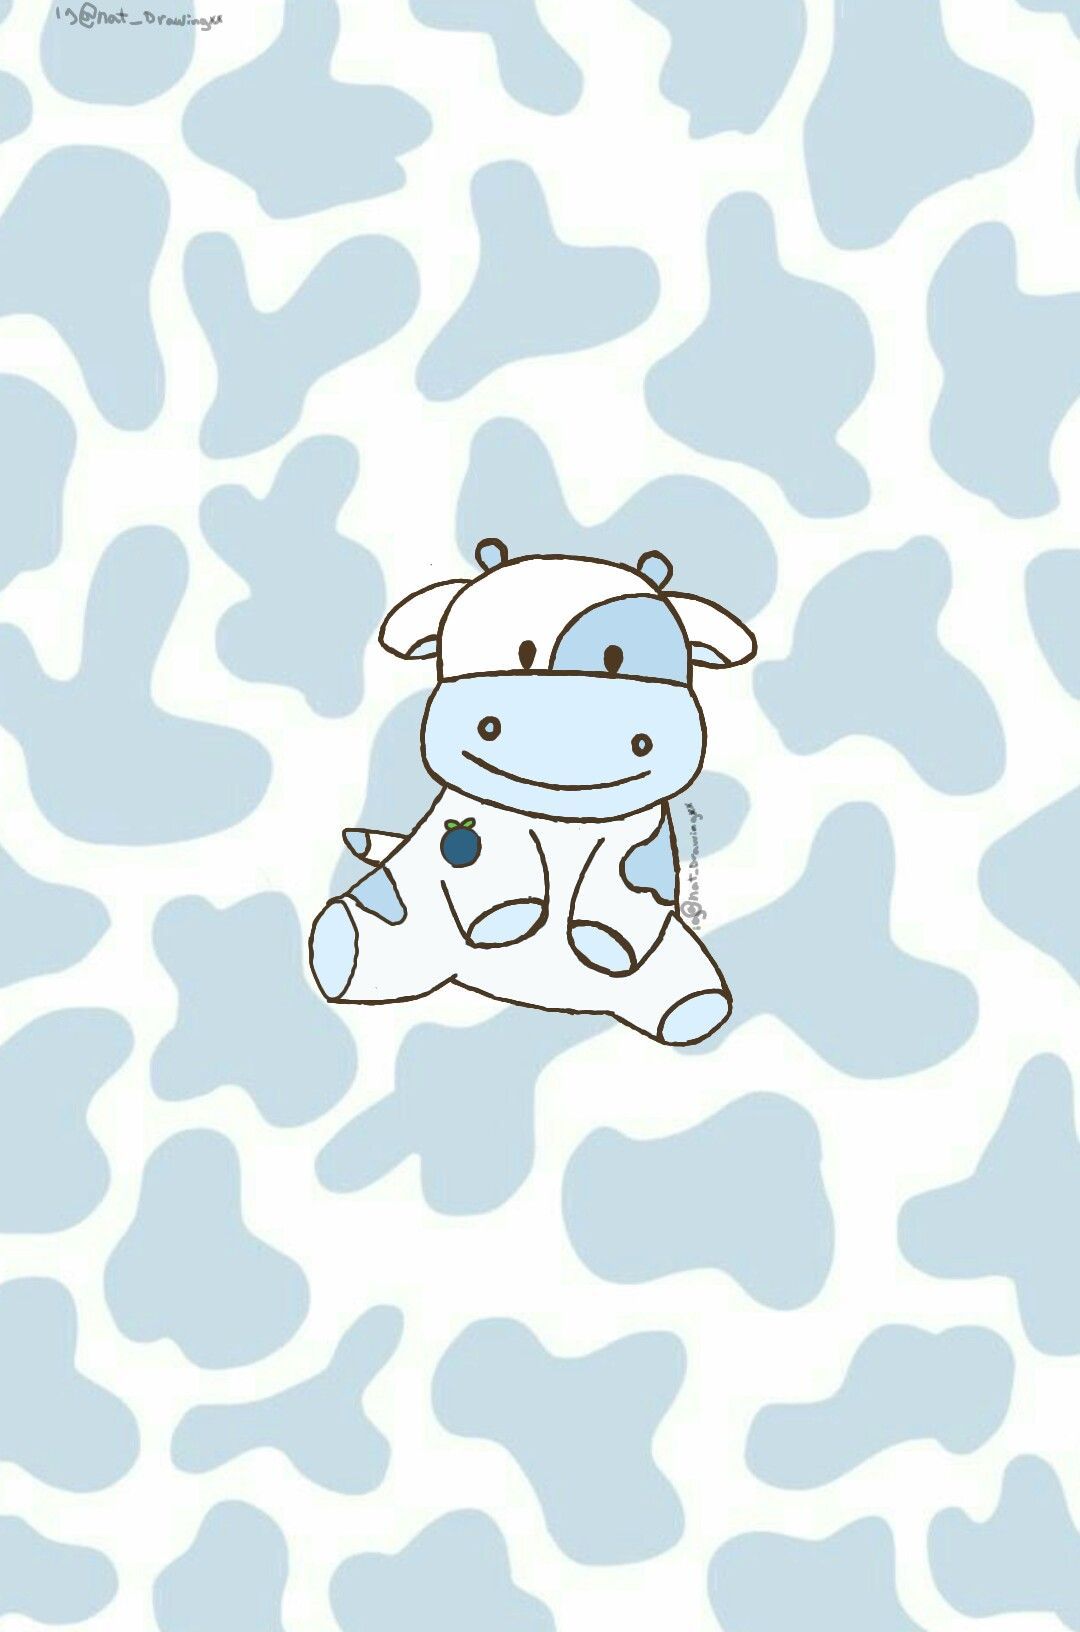 Nat_drawingxx on ig made this blueberry cow. Cow wallpaper, Cartoon wallpaper, iPhone wallpaper pattern